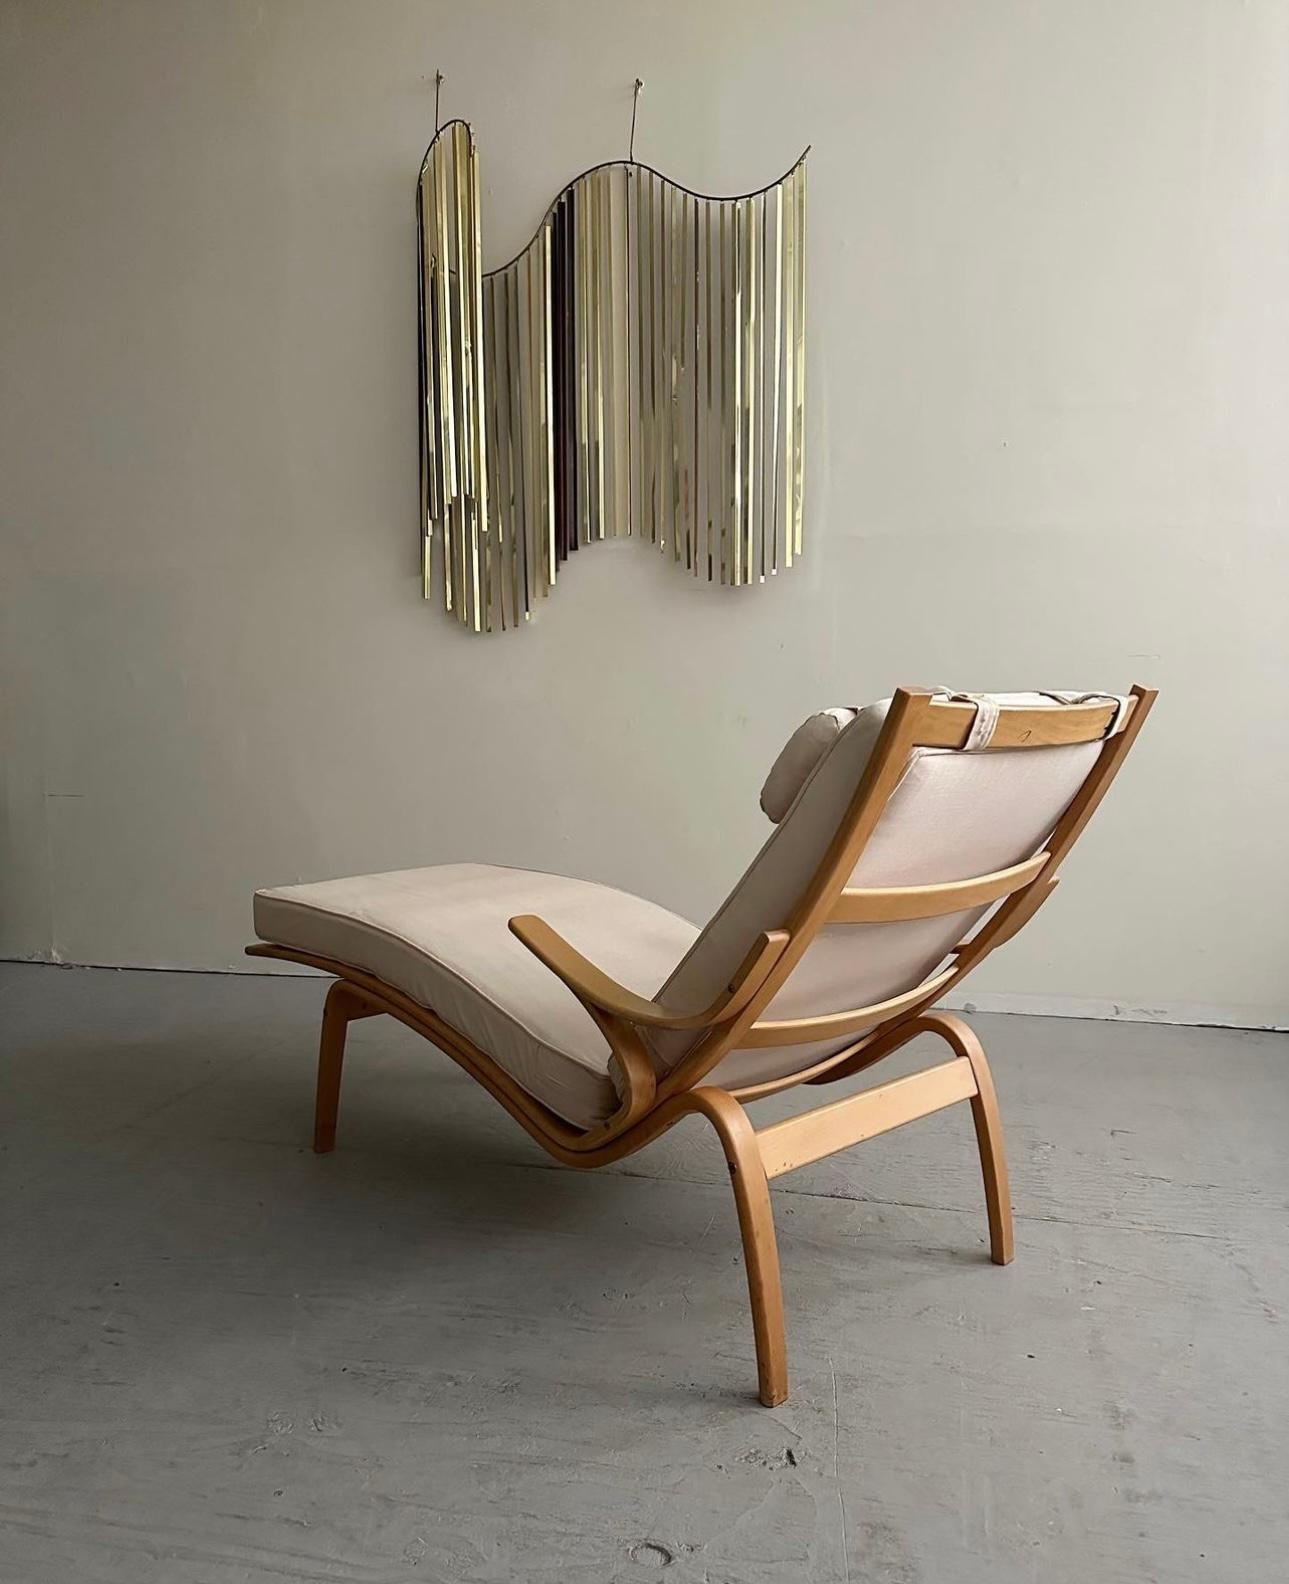 Mid-20th Century Mid-Century Modern Bentwood Chaise Lounge Designed by Alvar Aalto for Artek